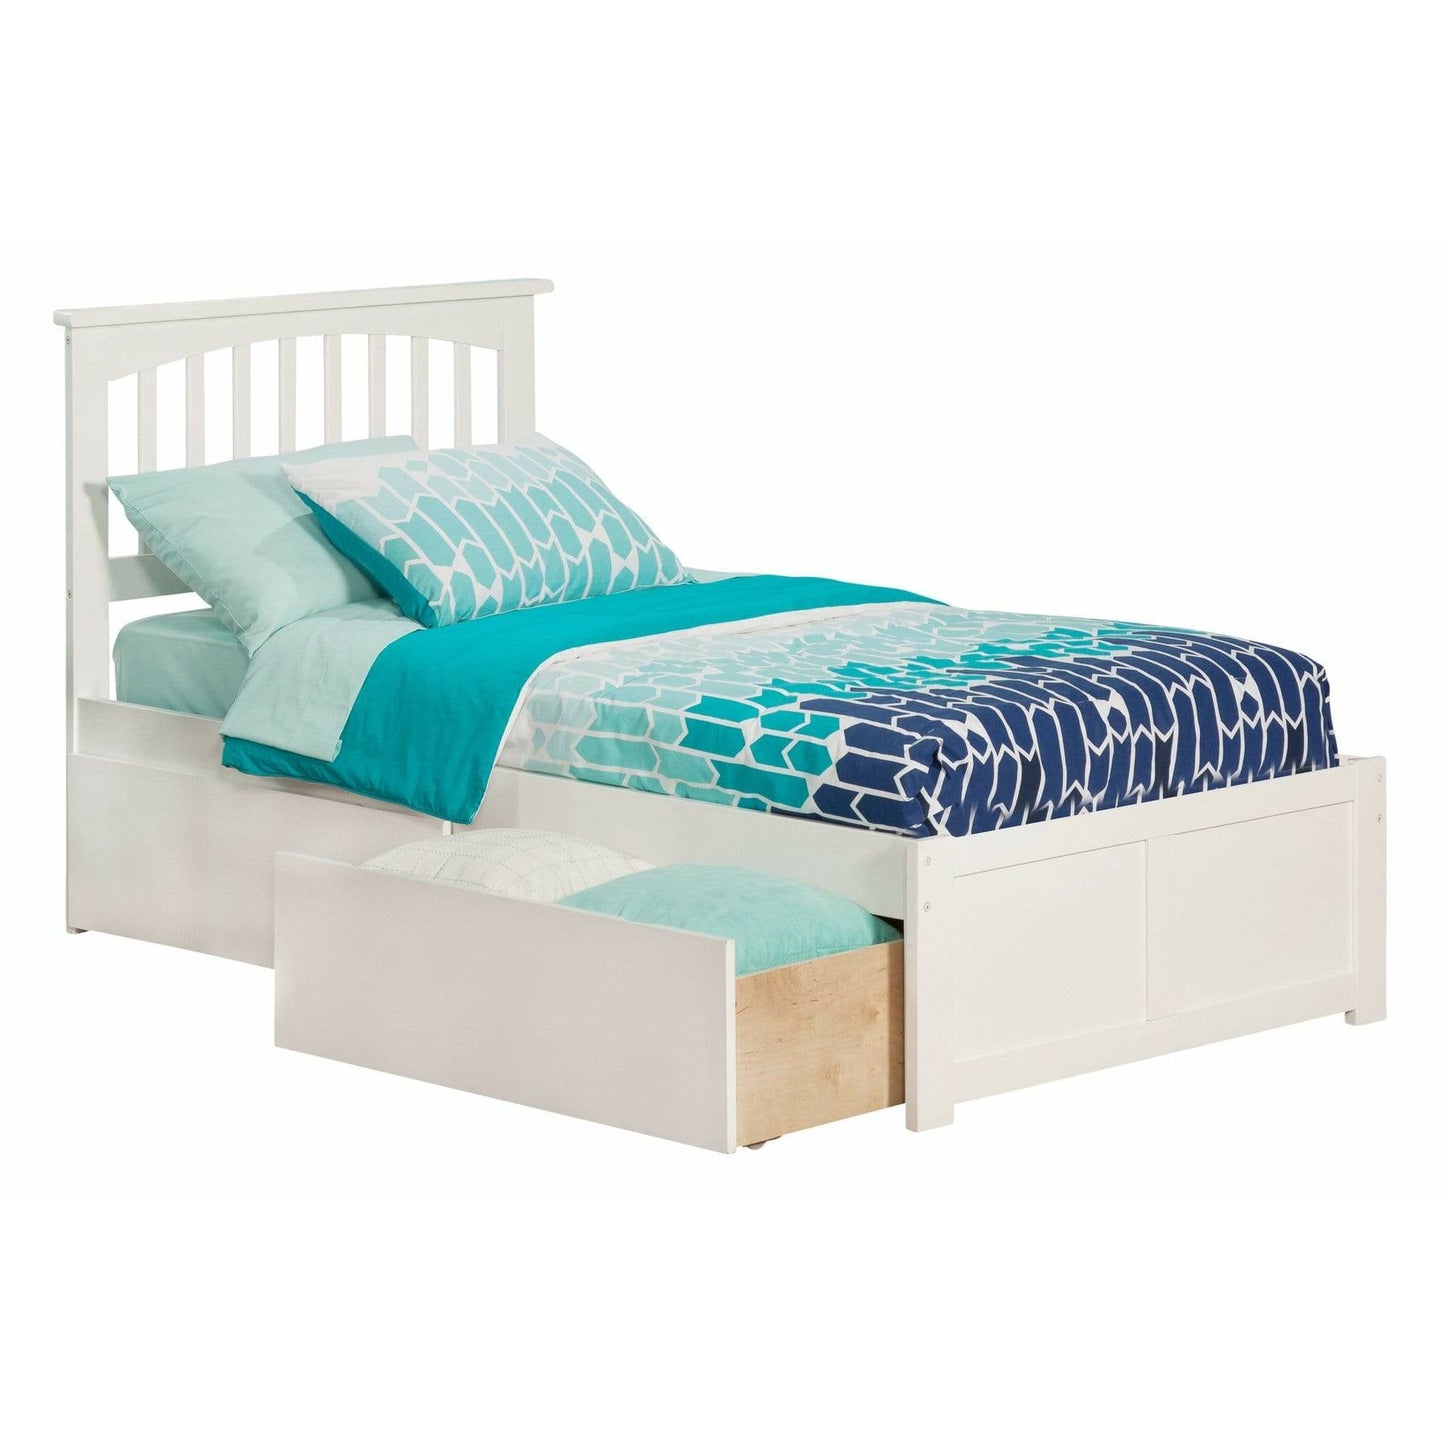 Atlantic Furniture Bed white Mission Twin XL Platform Bed with Flat Panel Foot Board and 2 Urban Bed Drawers in Espresso.